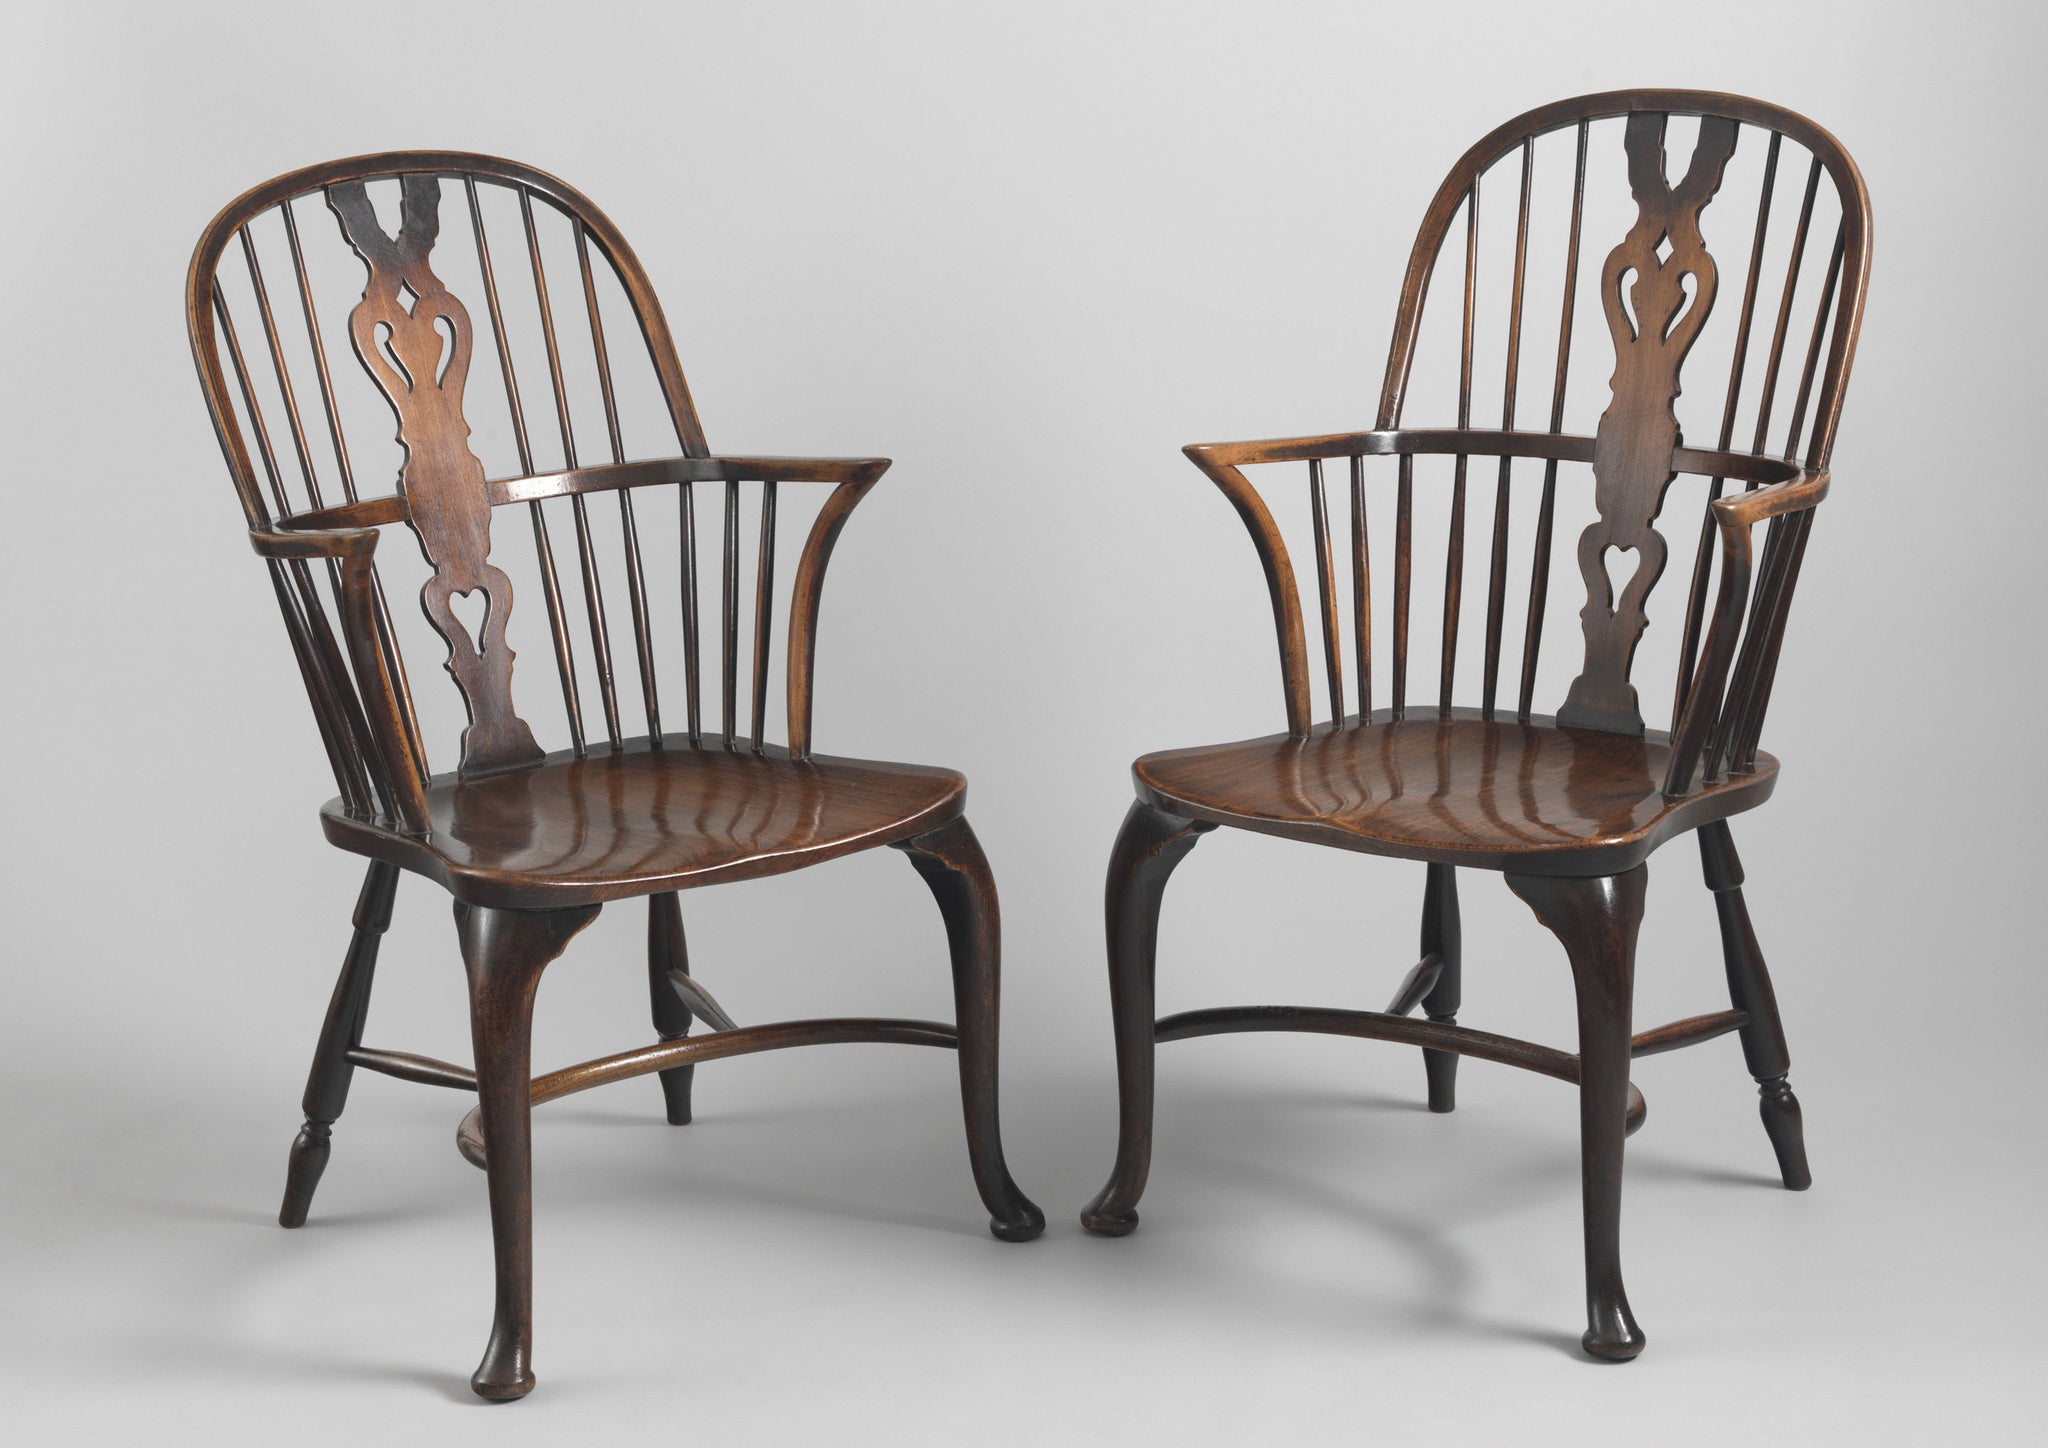 Refined Pair of Cabriole Legged Windsor Armchairs